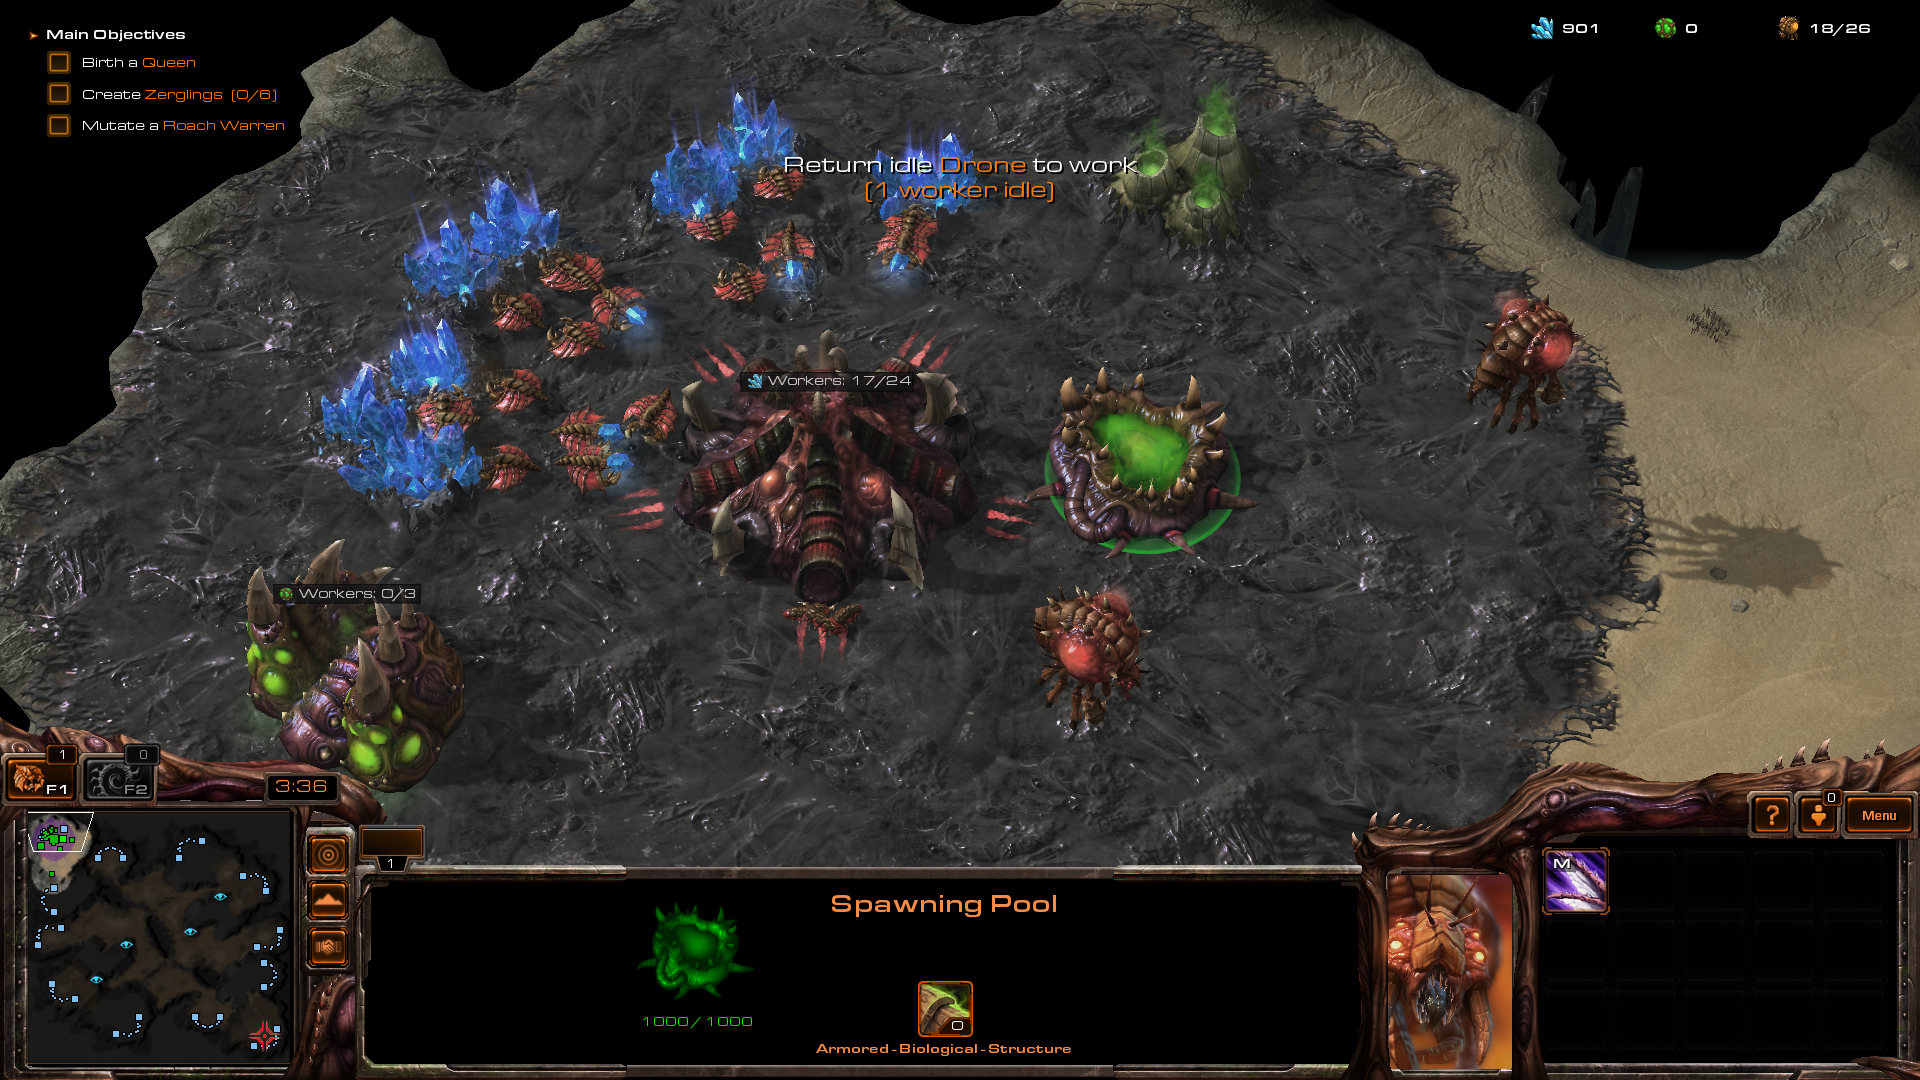 Video Game StarCraft Ii Heart Of The Swarm 1920x1080